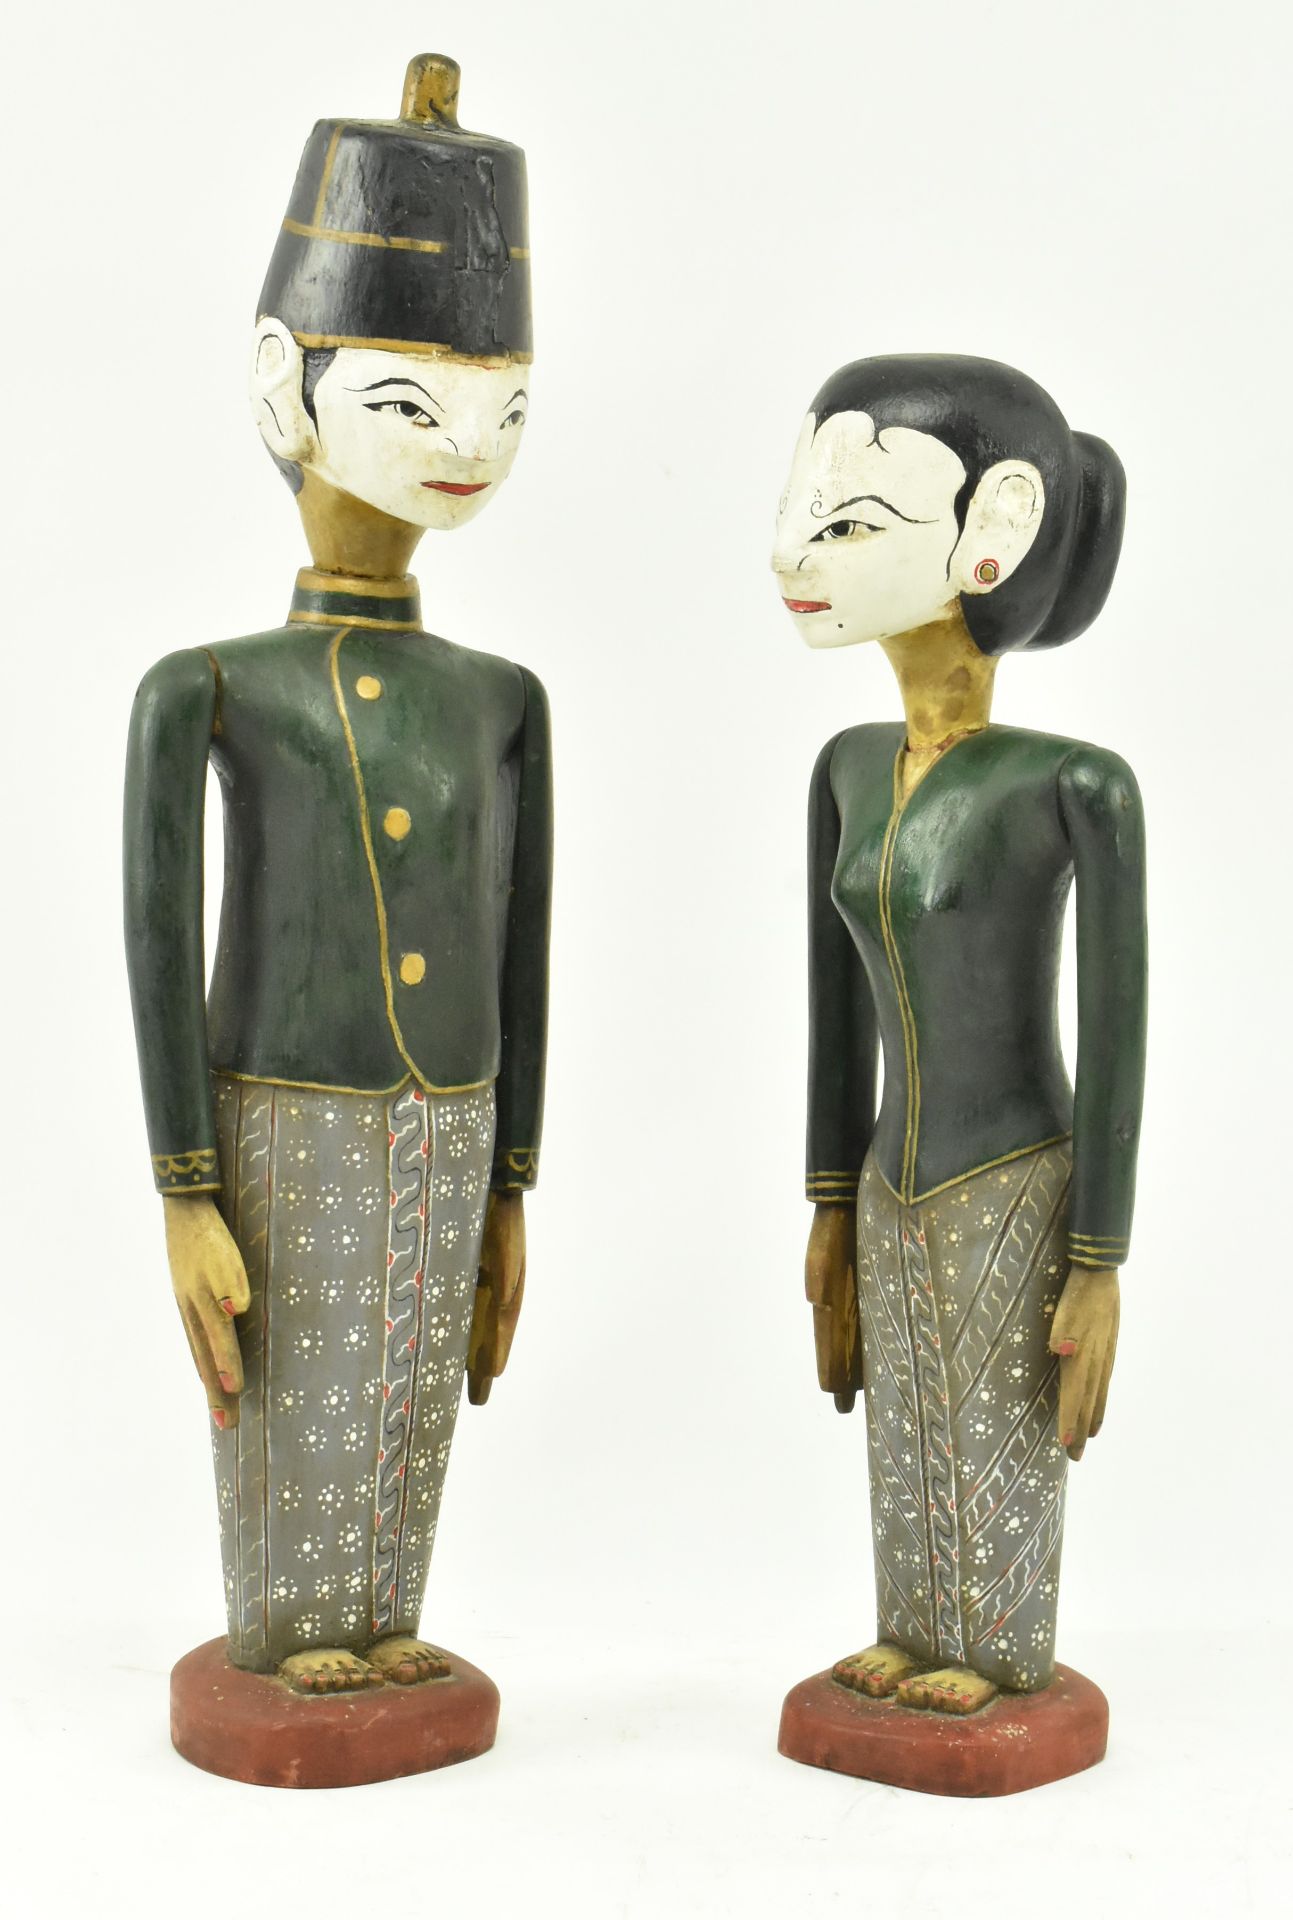 PAIR OF 20TH CENTURY CARVED AND PAINTED BALINESE FIGURES